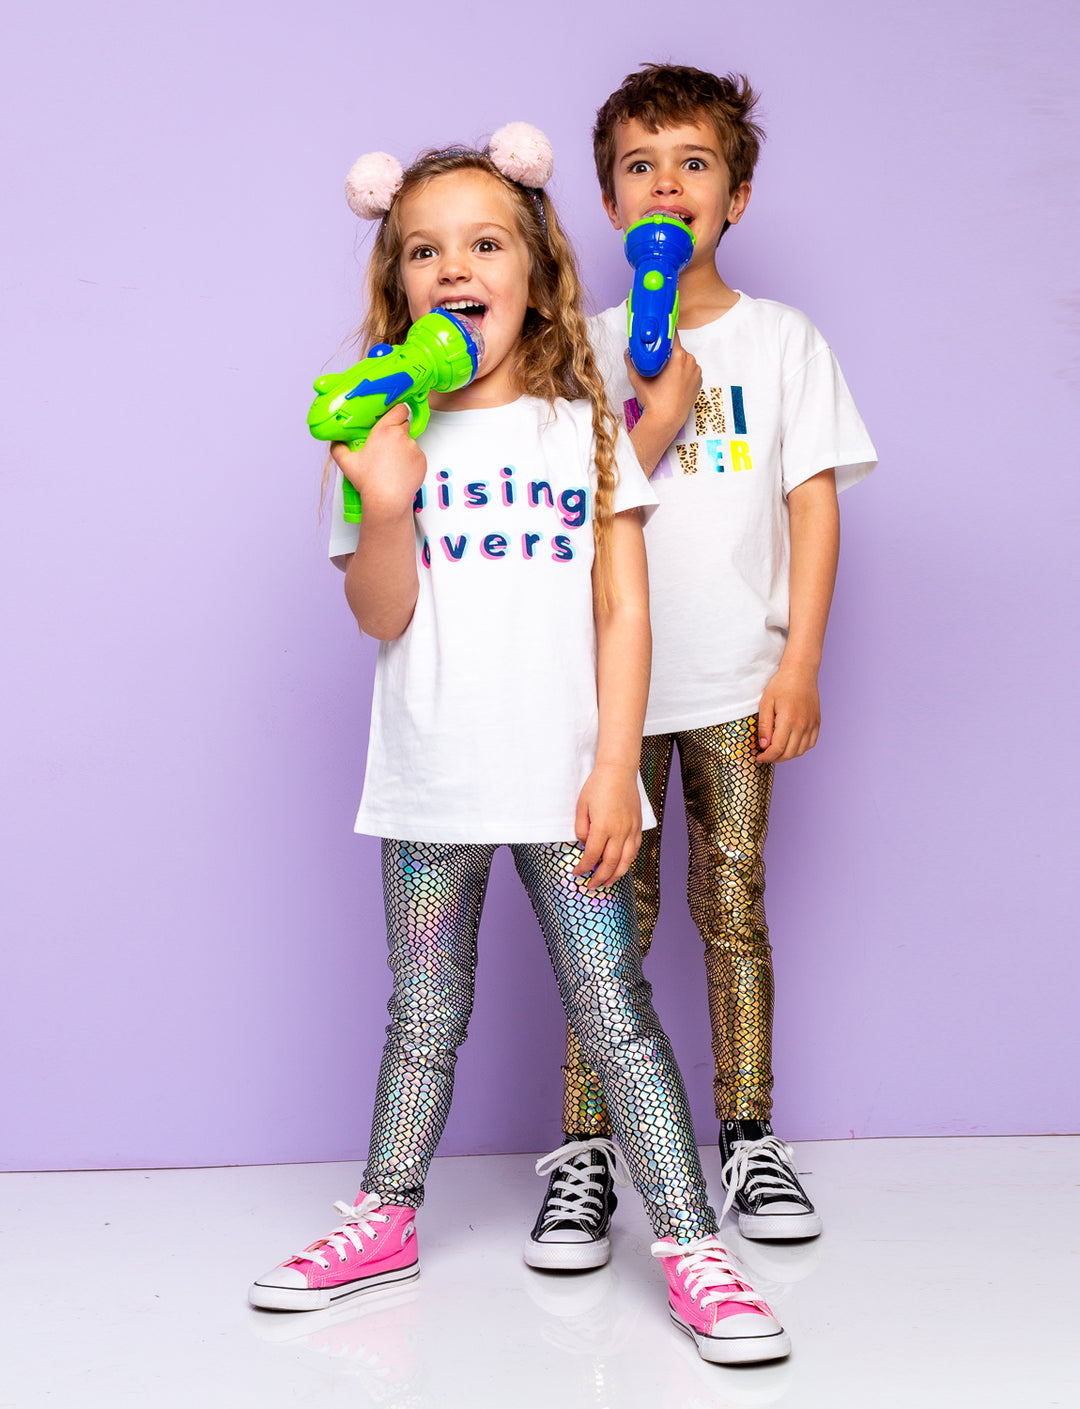 Boy and girl wearings holographic silver and gold snakeskin leggings.